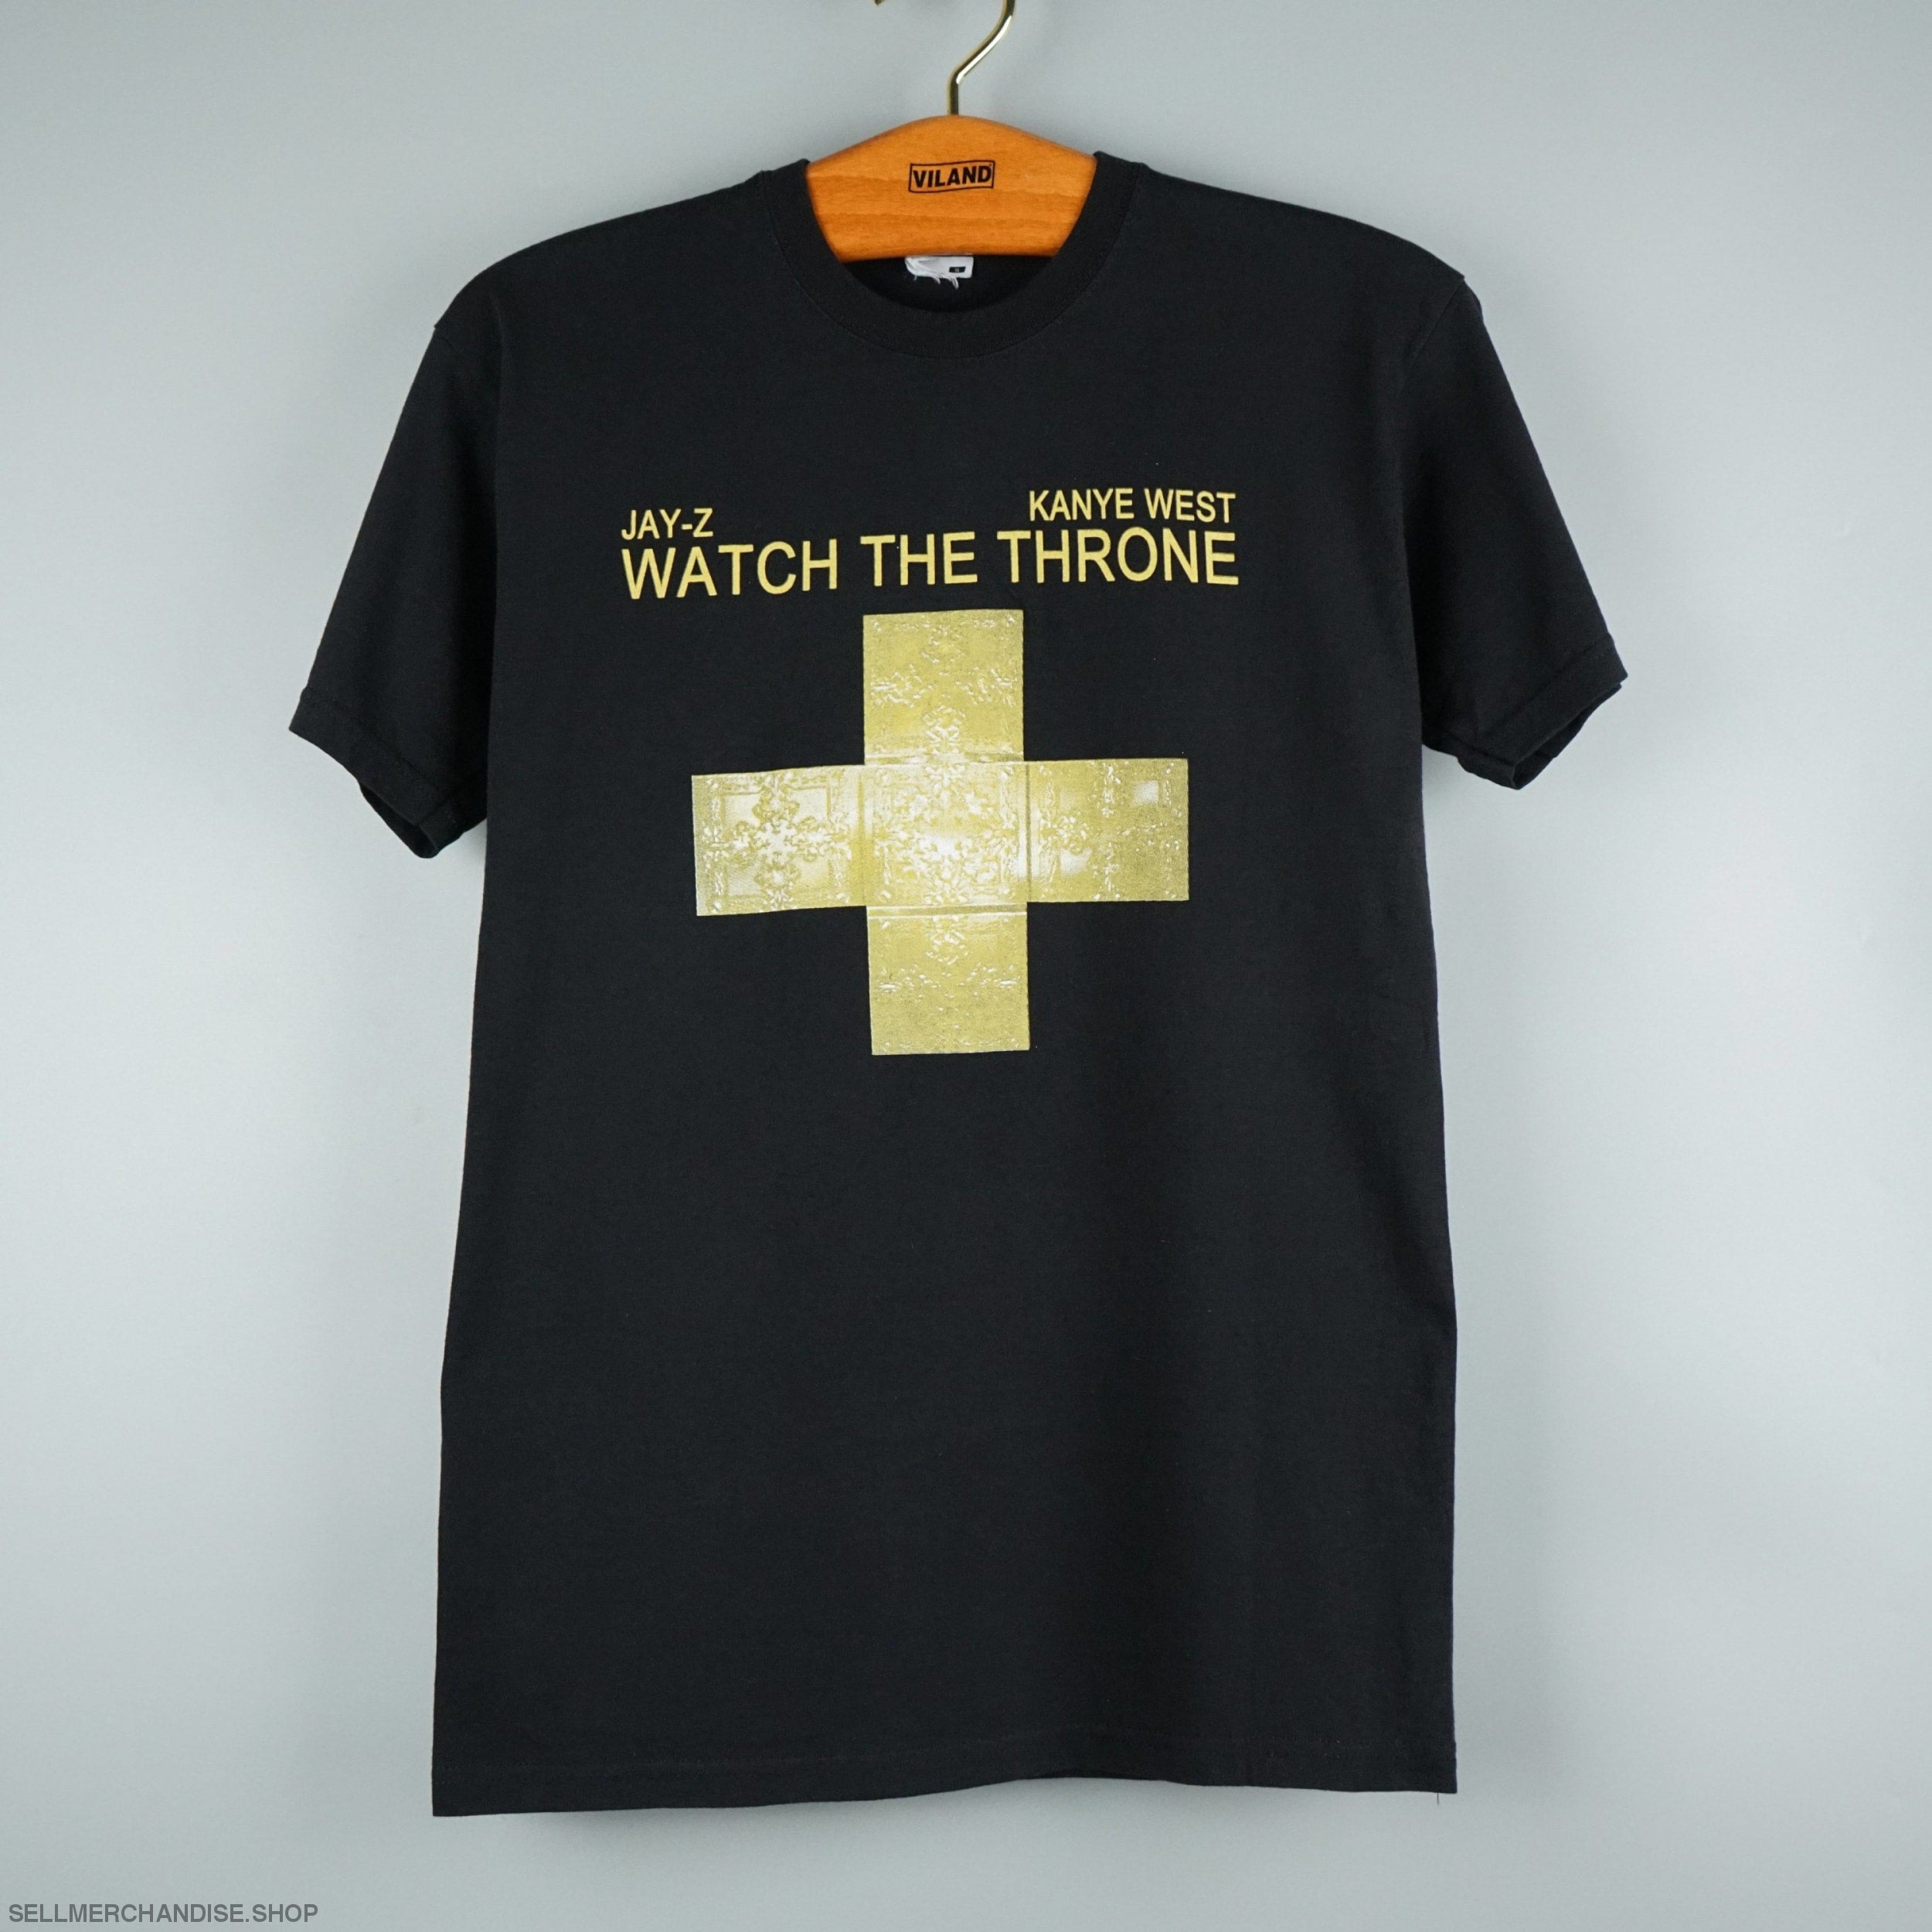 vintage 2012 Watch The Throne tour t-shirt | SellMerchandise